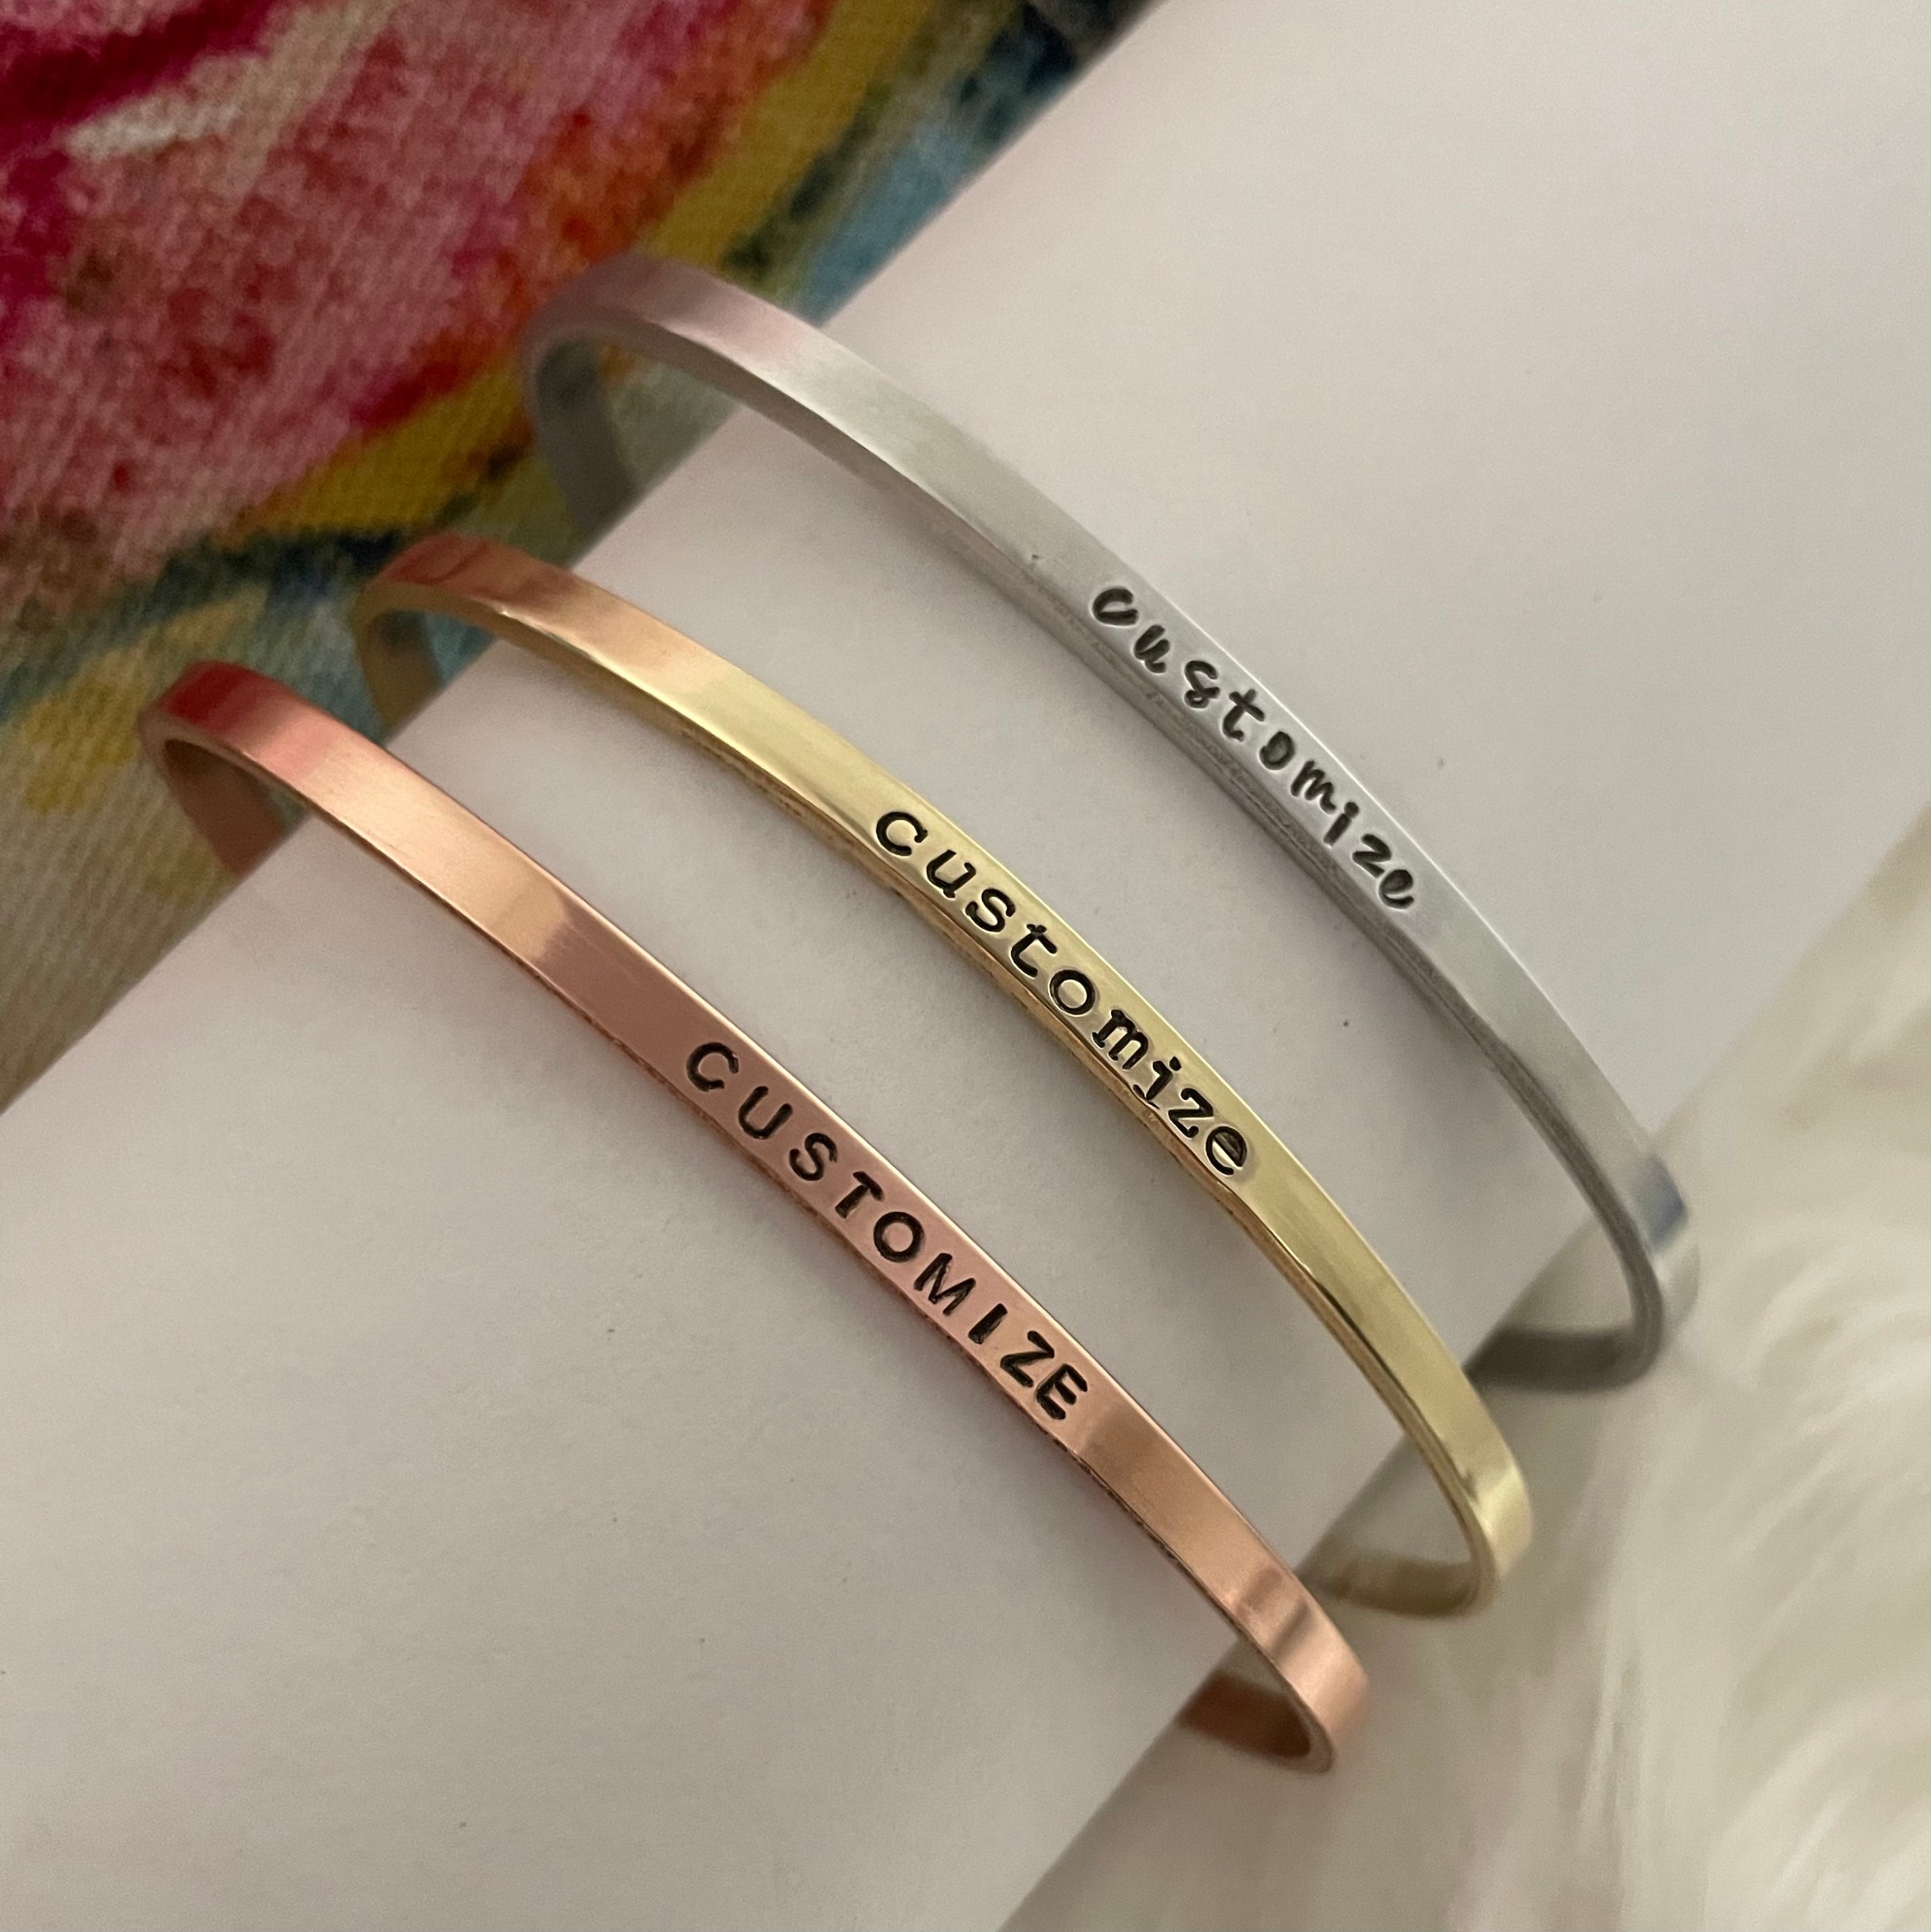 14k GOLD OVERLAY XOXO Personalized Name Bracelet available in 5-6-7-8  inches | eBay